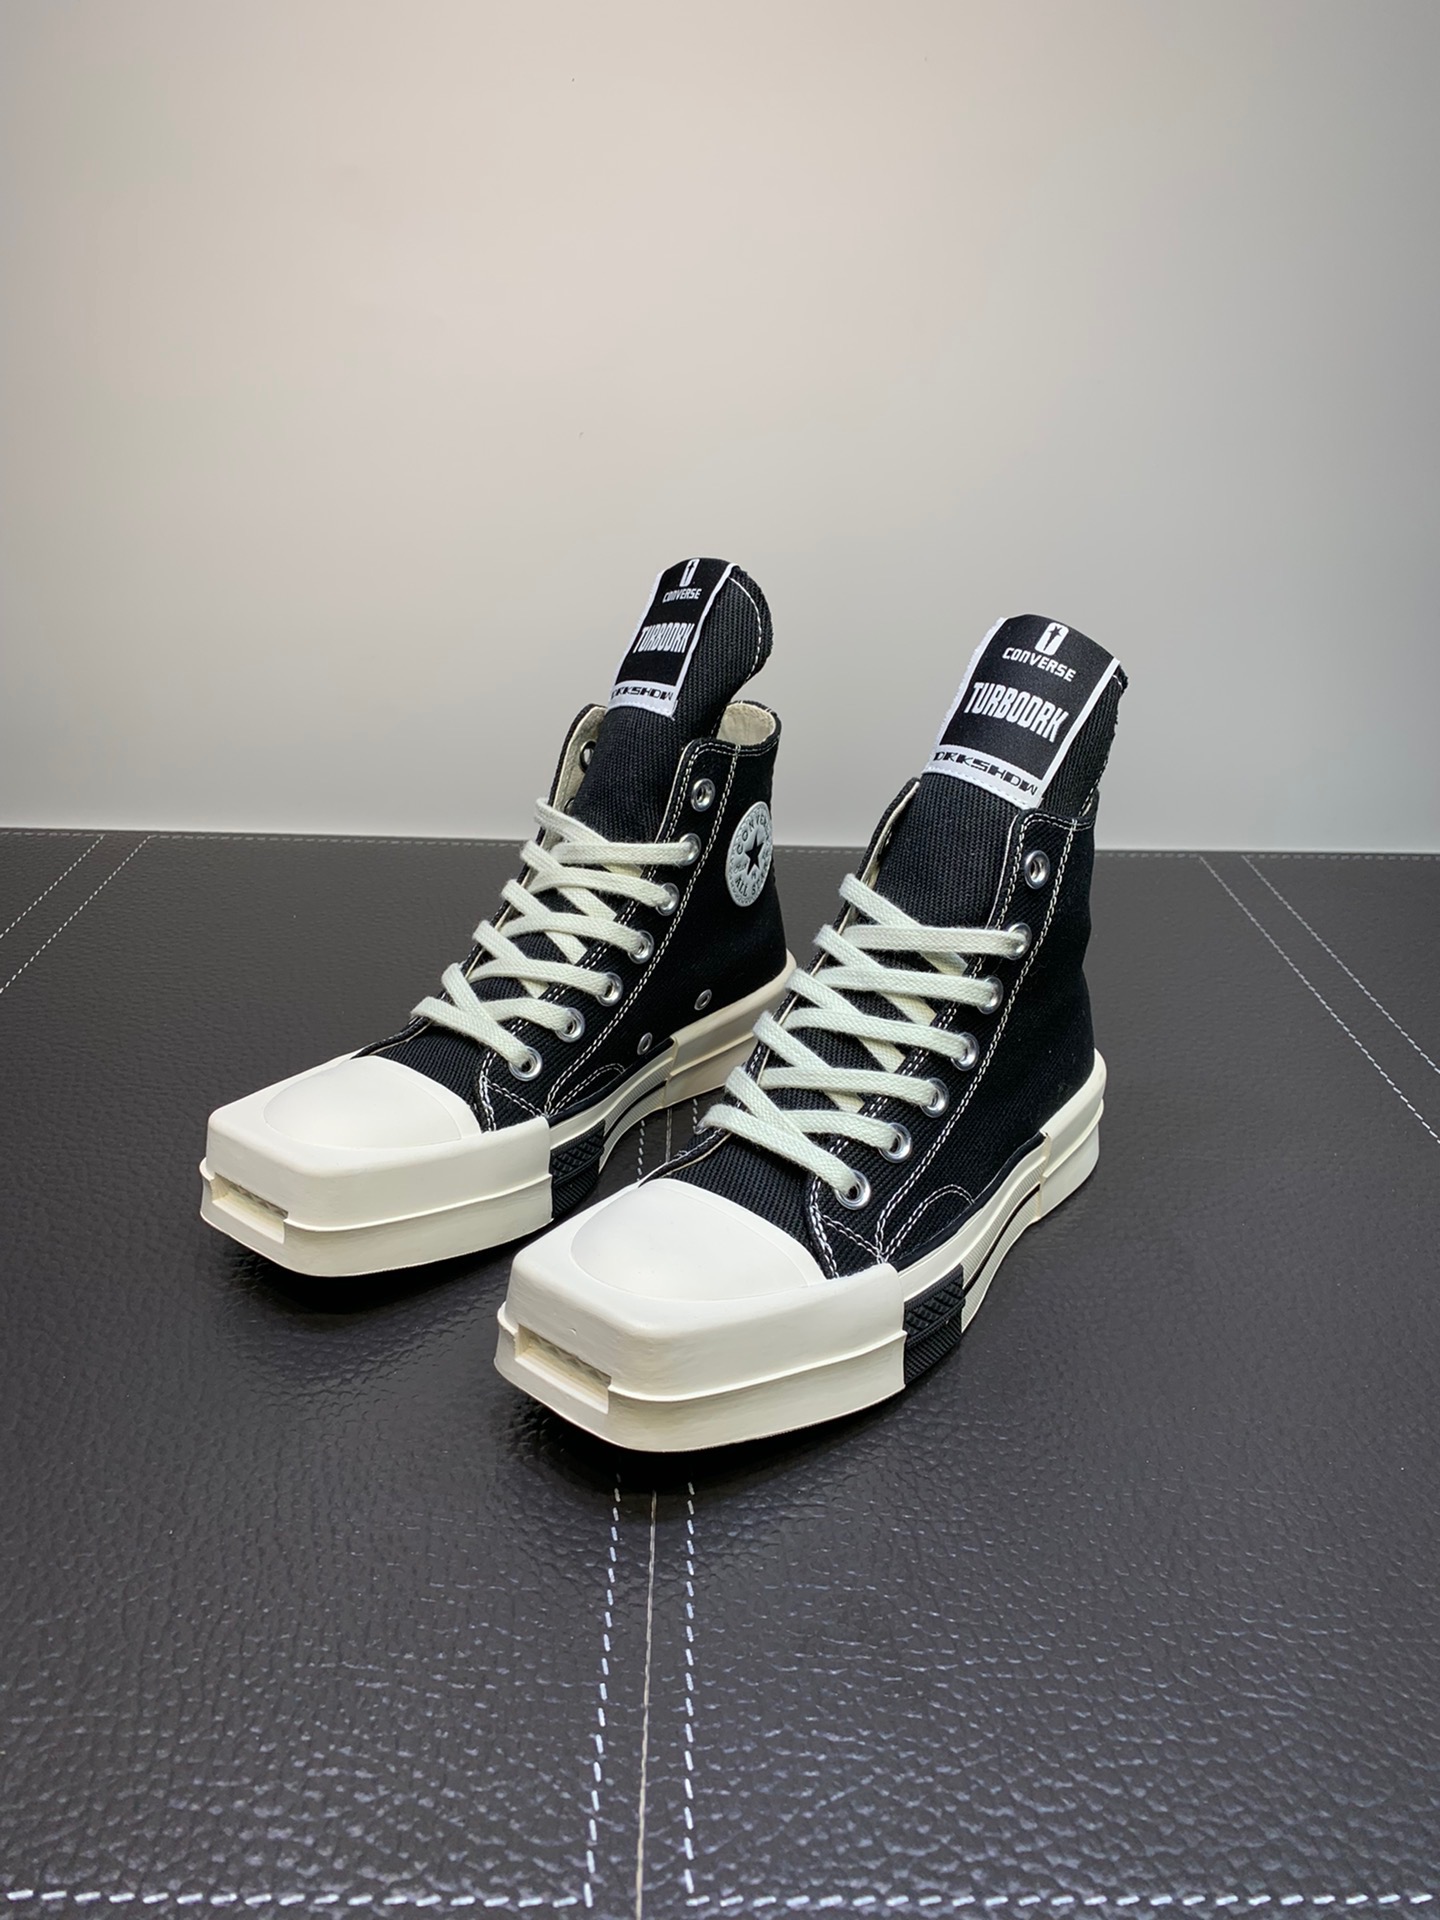 US$ 89.00 - Square toe high top canvas shoes black and white- - www ...